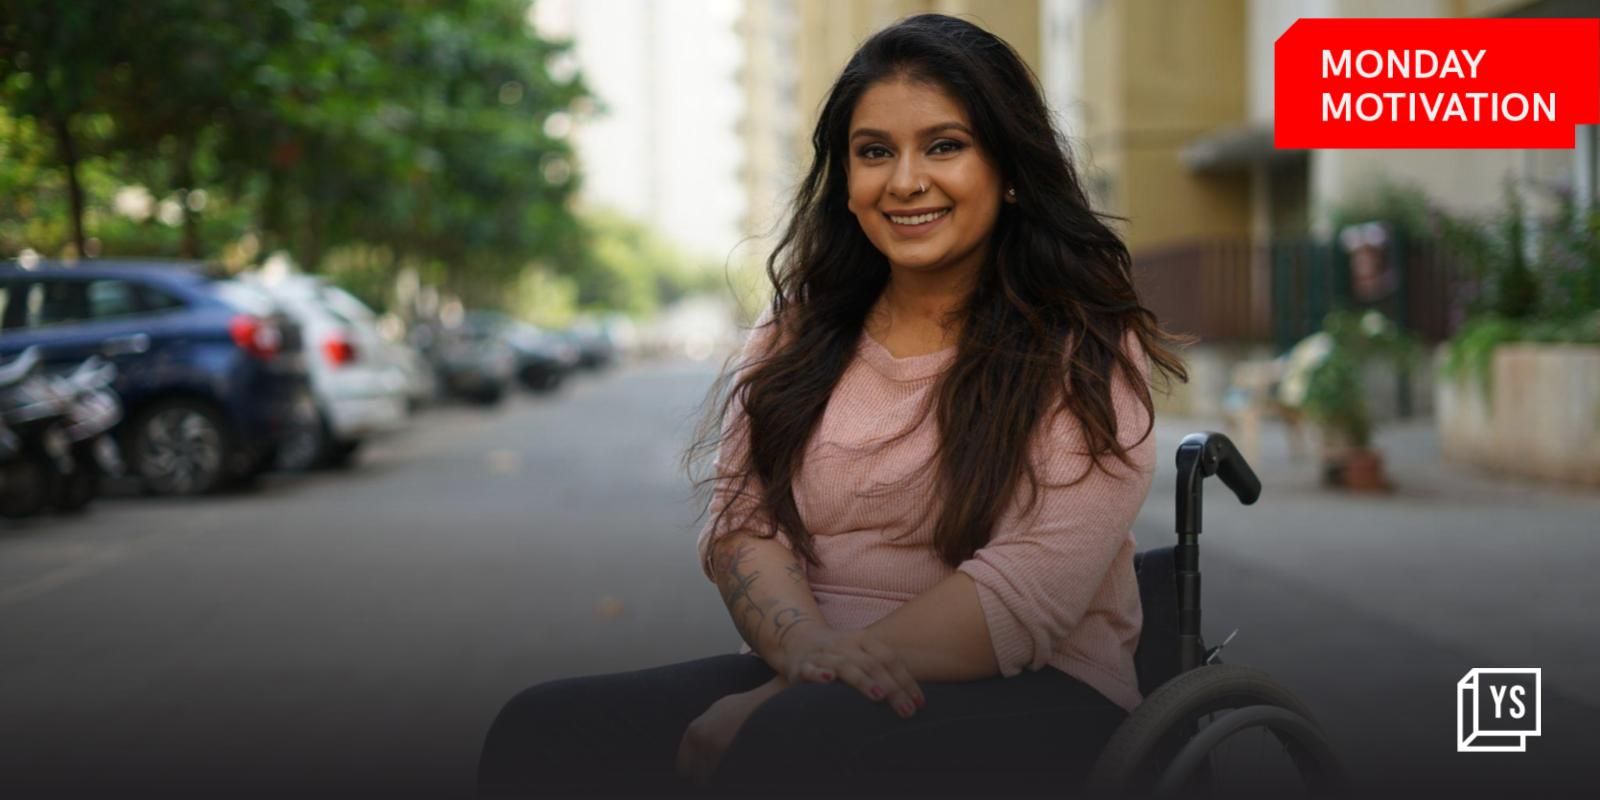 Meet Virali Modi who defied all odds to become a disability champion